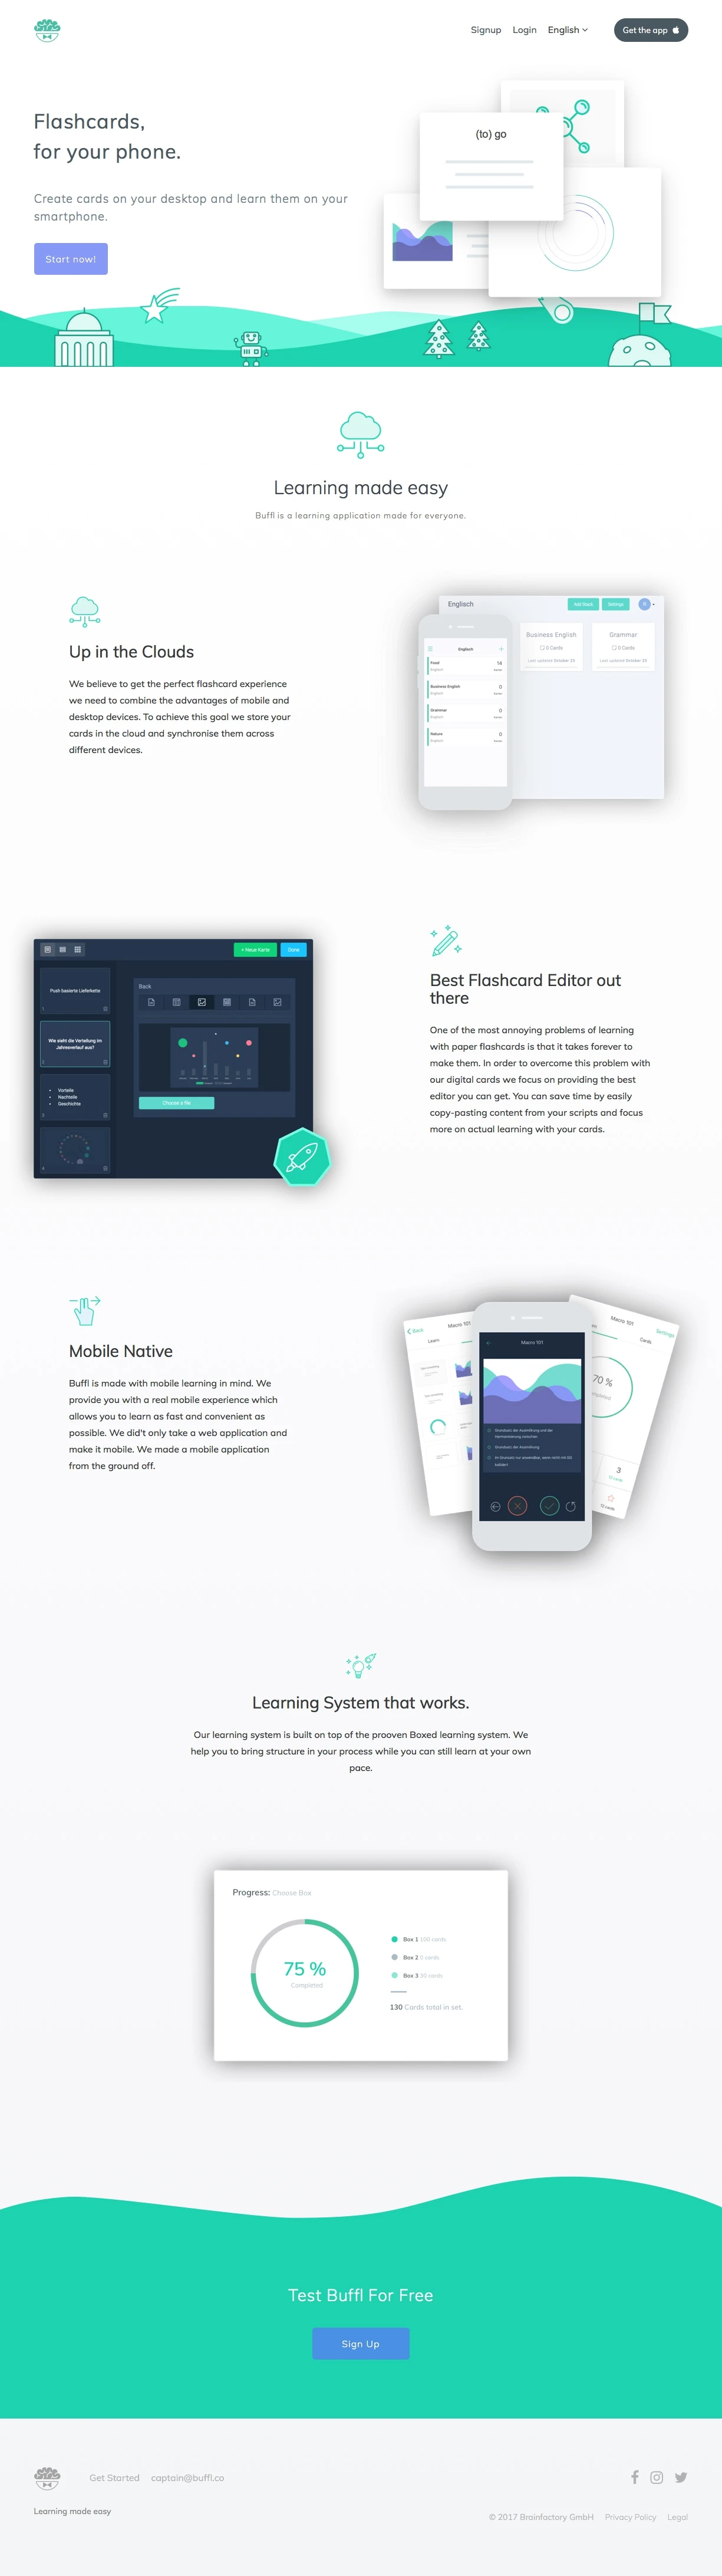 Buffl Landing Page Example: Create cards on your desktop and learn them on your smartphone.